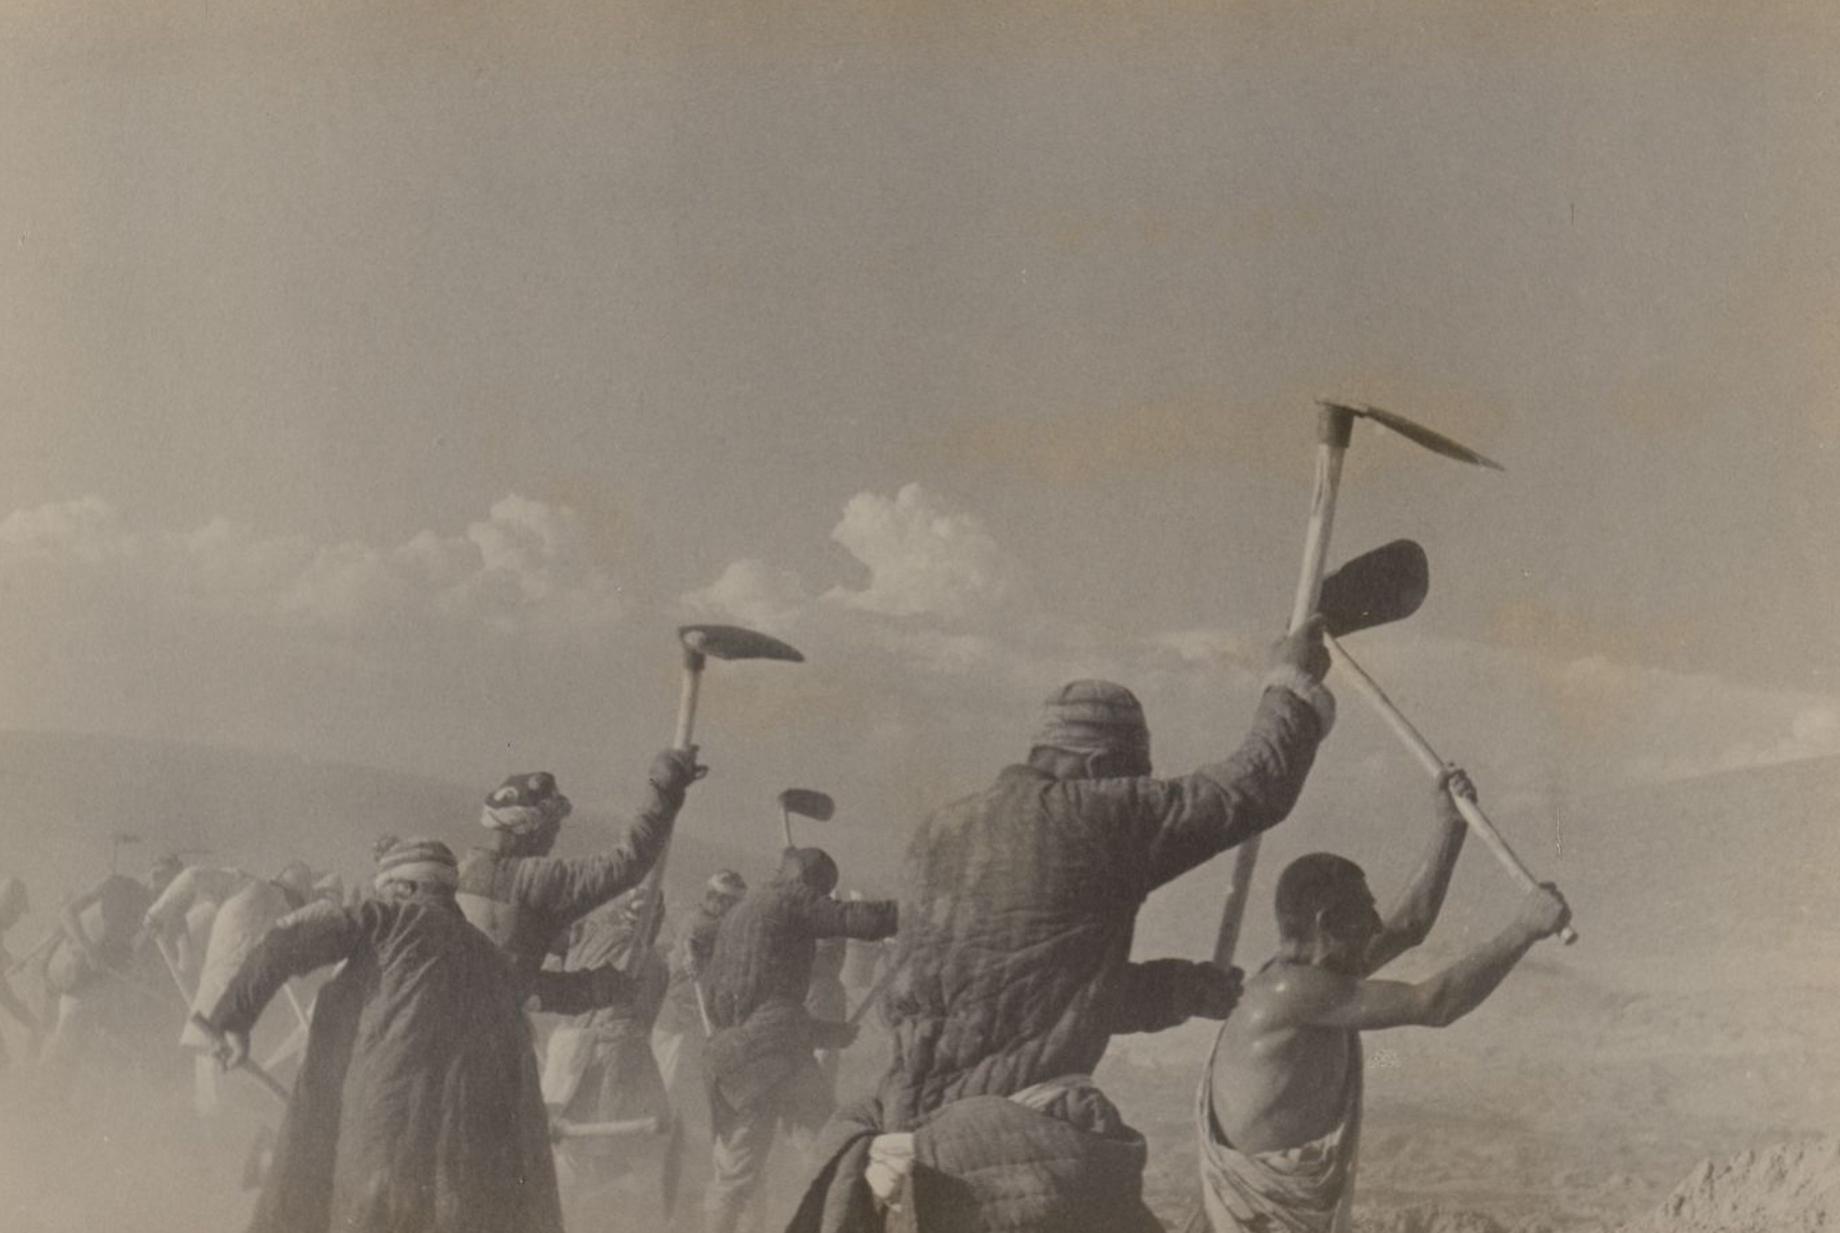 Large group of workers wielding ketmen shovels, surrounded by sky, sand, and mountains in the distance.